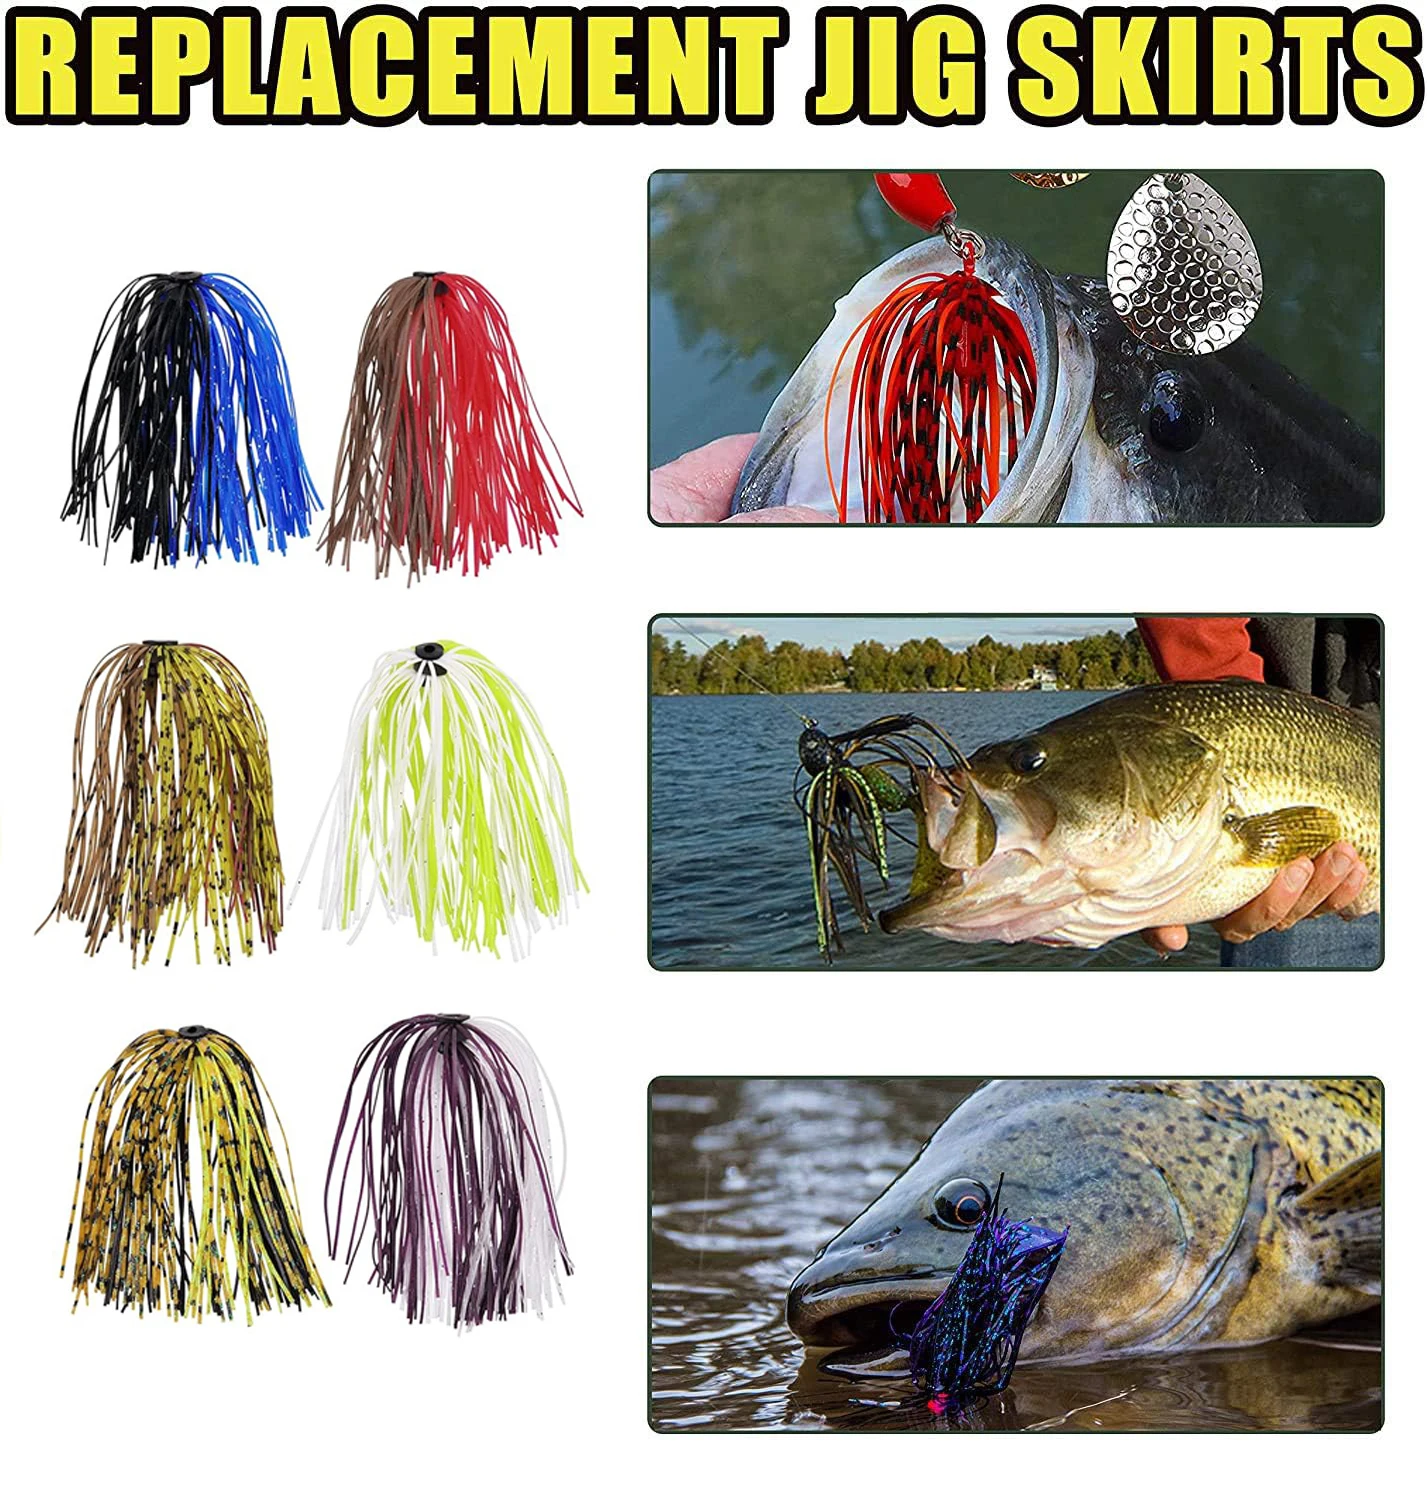 Easy Catch 10pcs Mixed Color Fishing Rubber Jig Skirts 50 Strands